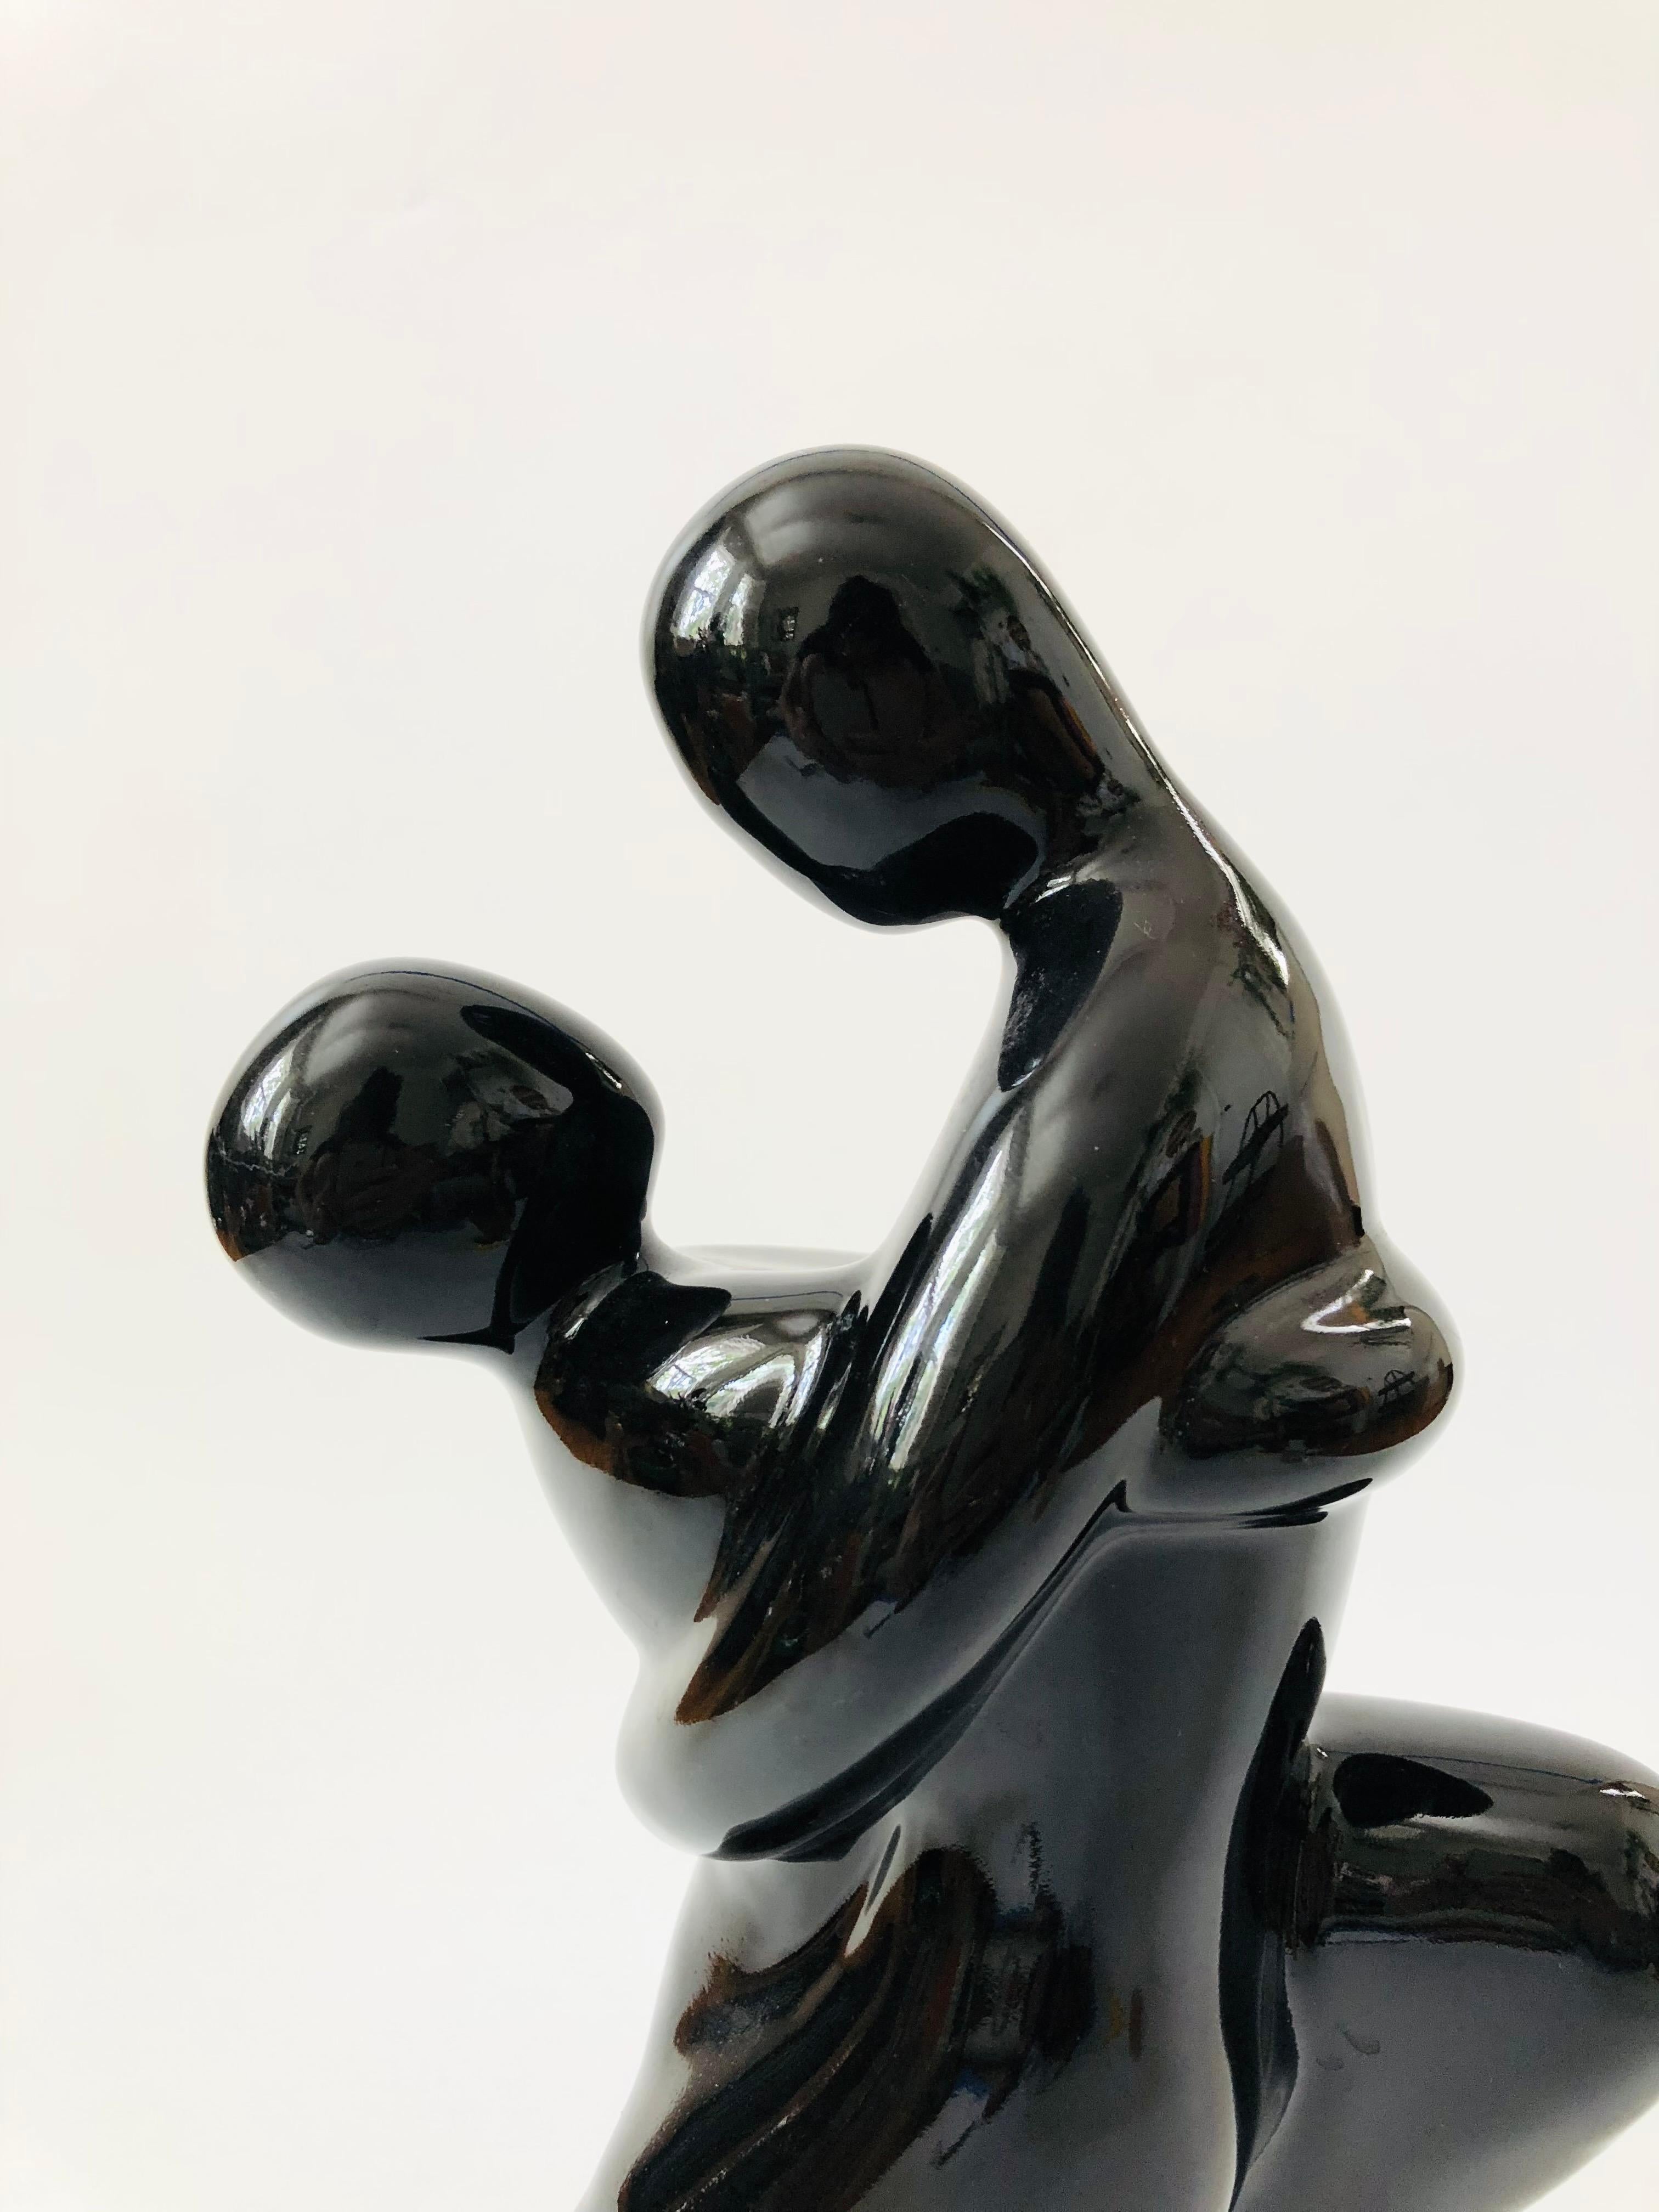 A large 1980s figurative ceramic sculpture by Haeger. Beautiful deco stylized detailing to the embracing couple, finished in a high gloss black finish. Sticker on the base by Haeger.